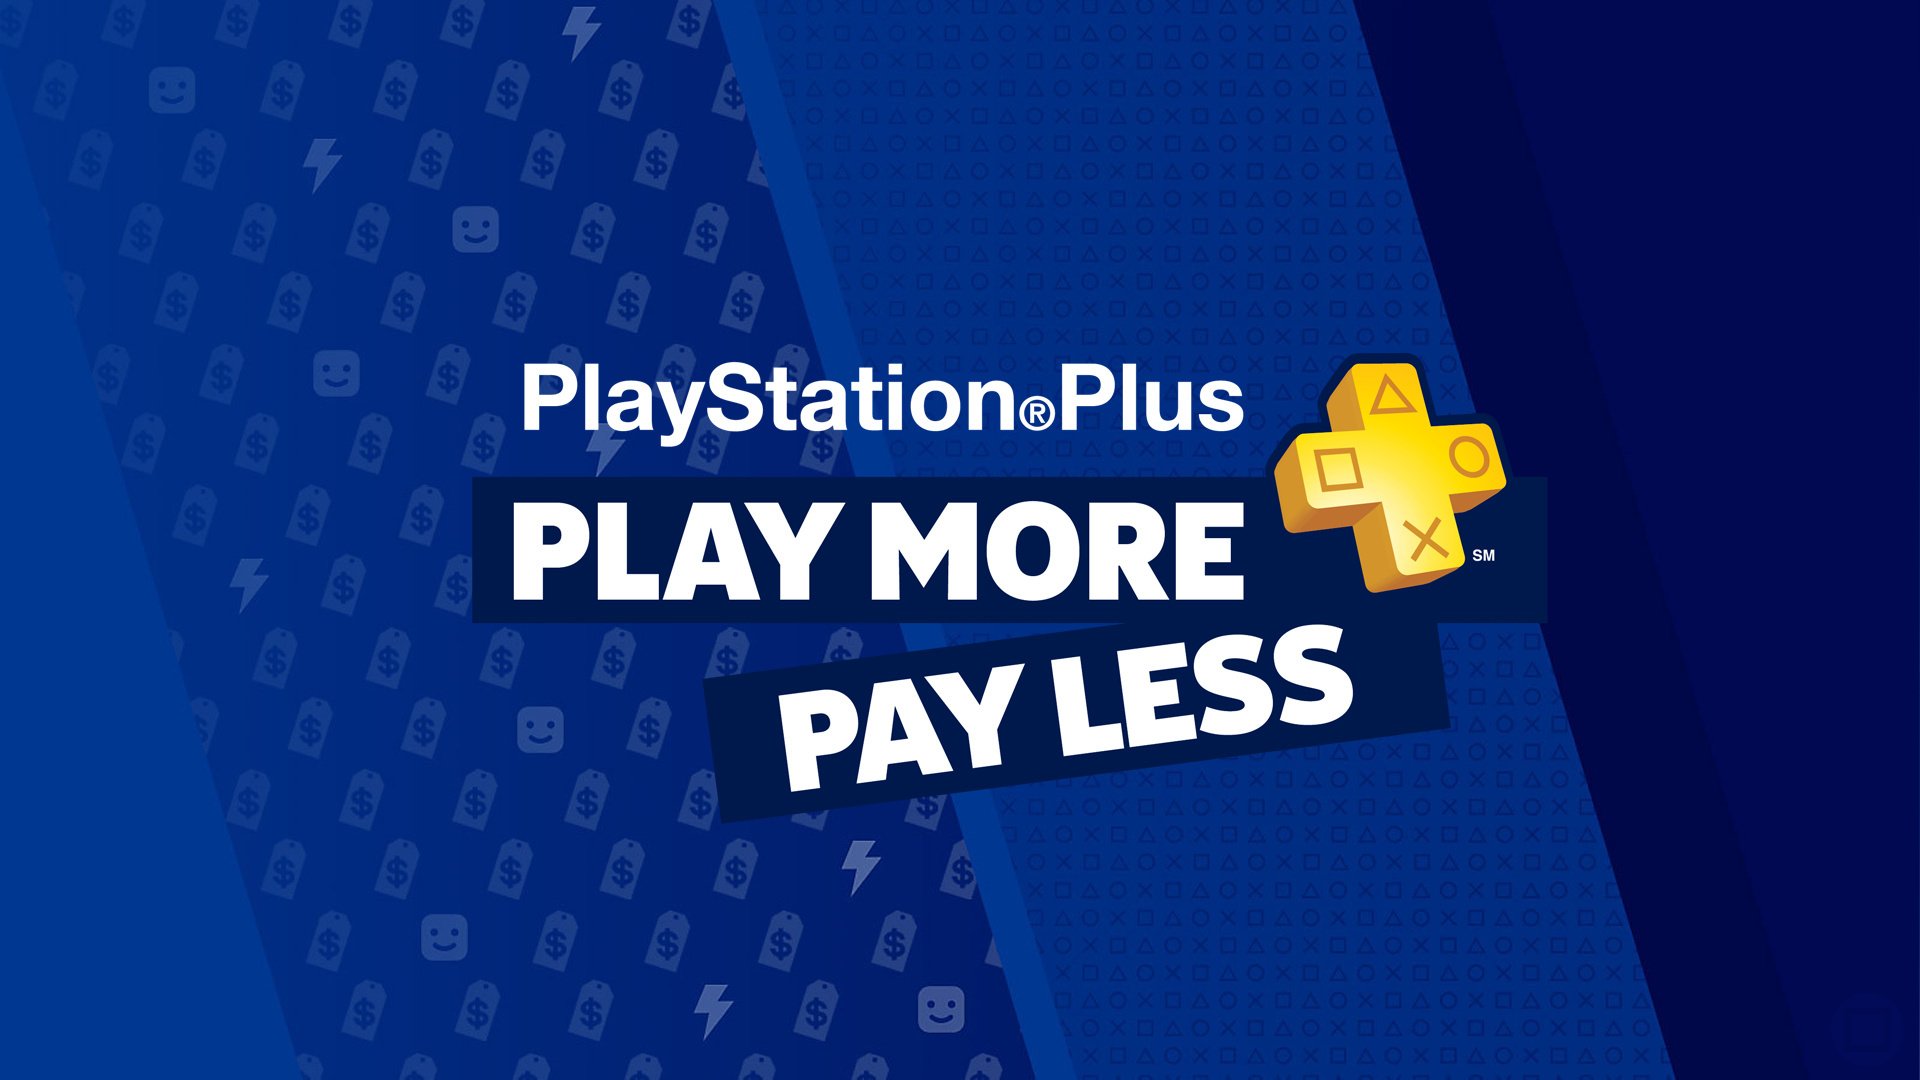 playstation plus on two consoles